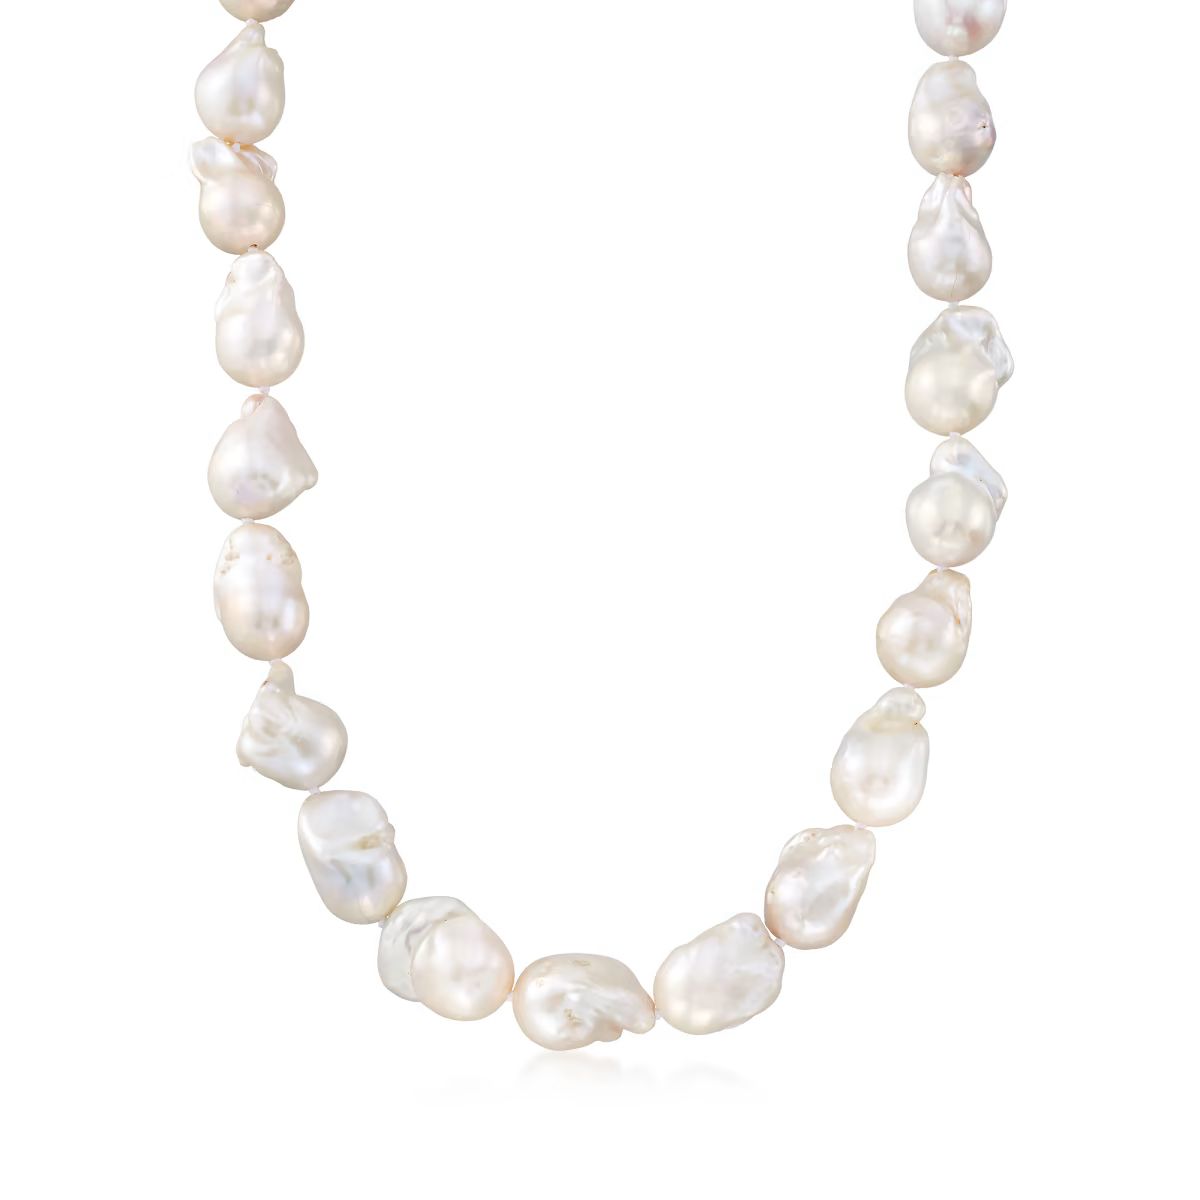 12-15mm Cultured Baroque Pearl Necklace with 14kt Yellow Gold. 18" | Ross-Simons